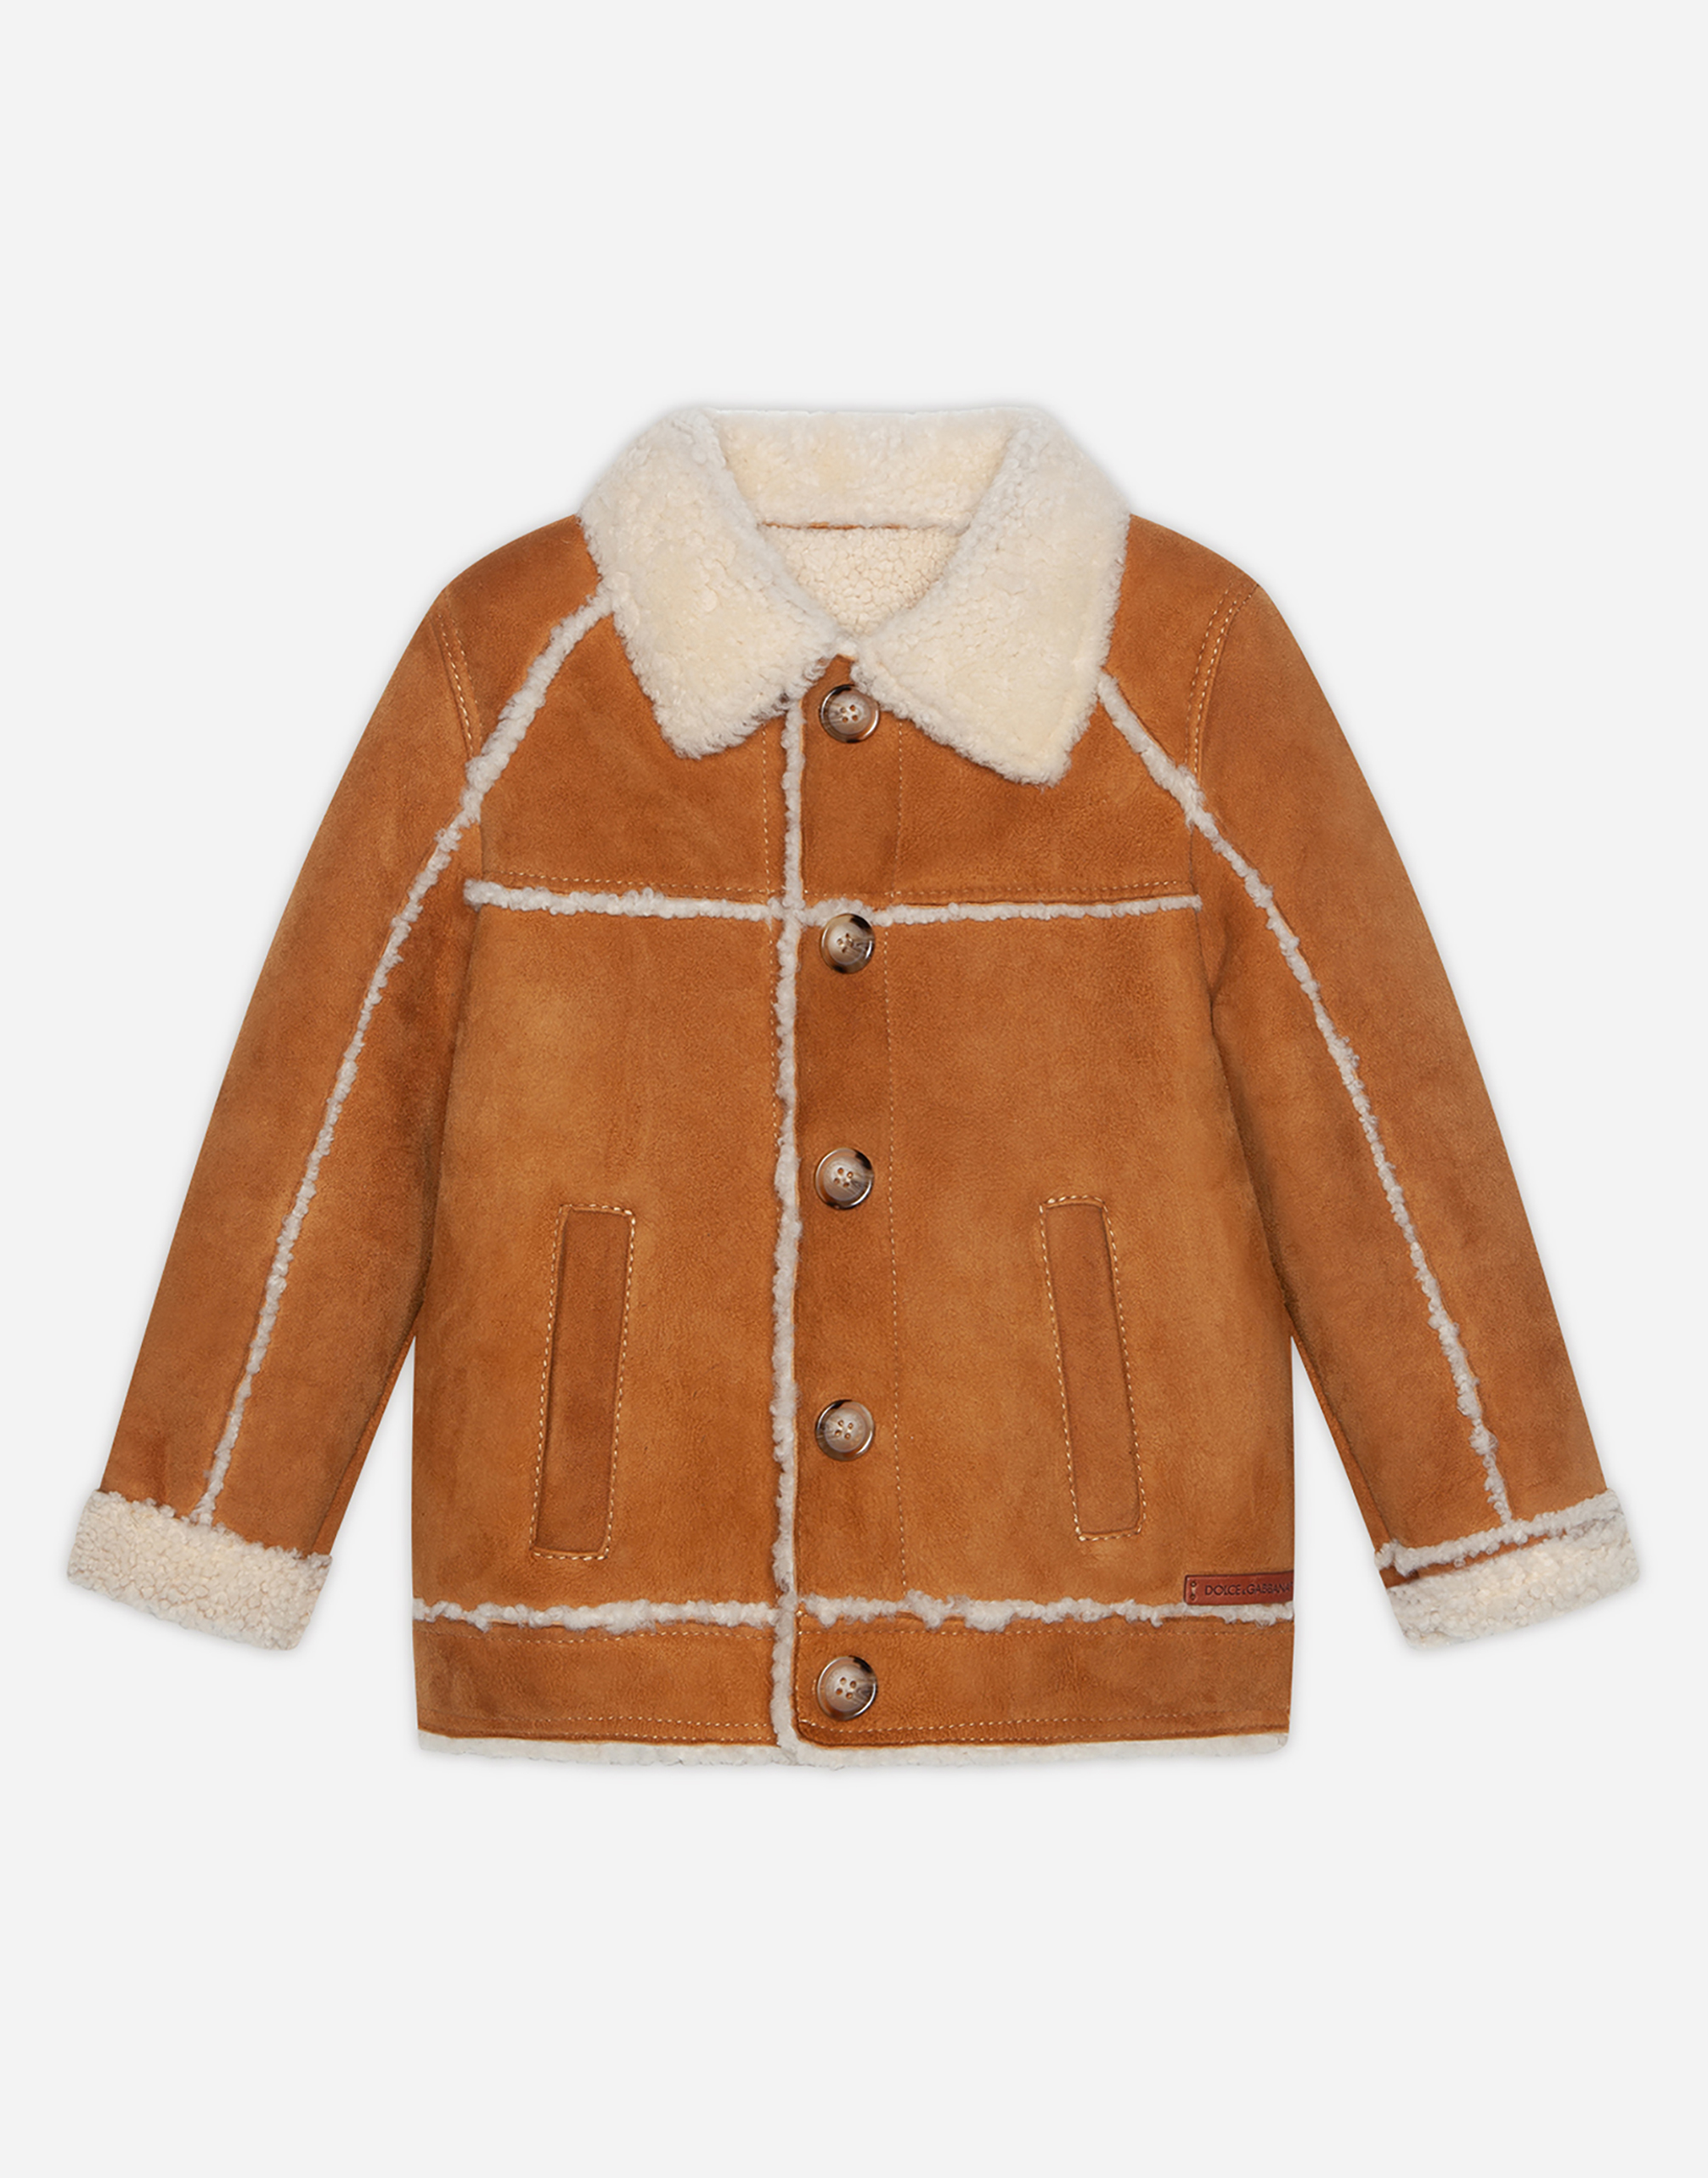 DOLCE & GABBANA Single-breasted jacket in cognac-colored merino shearling